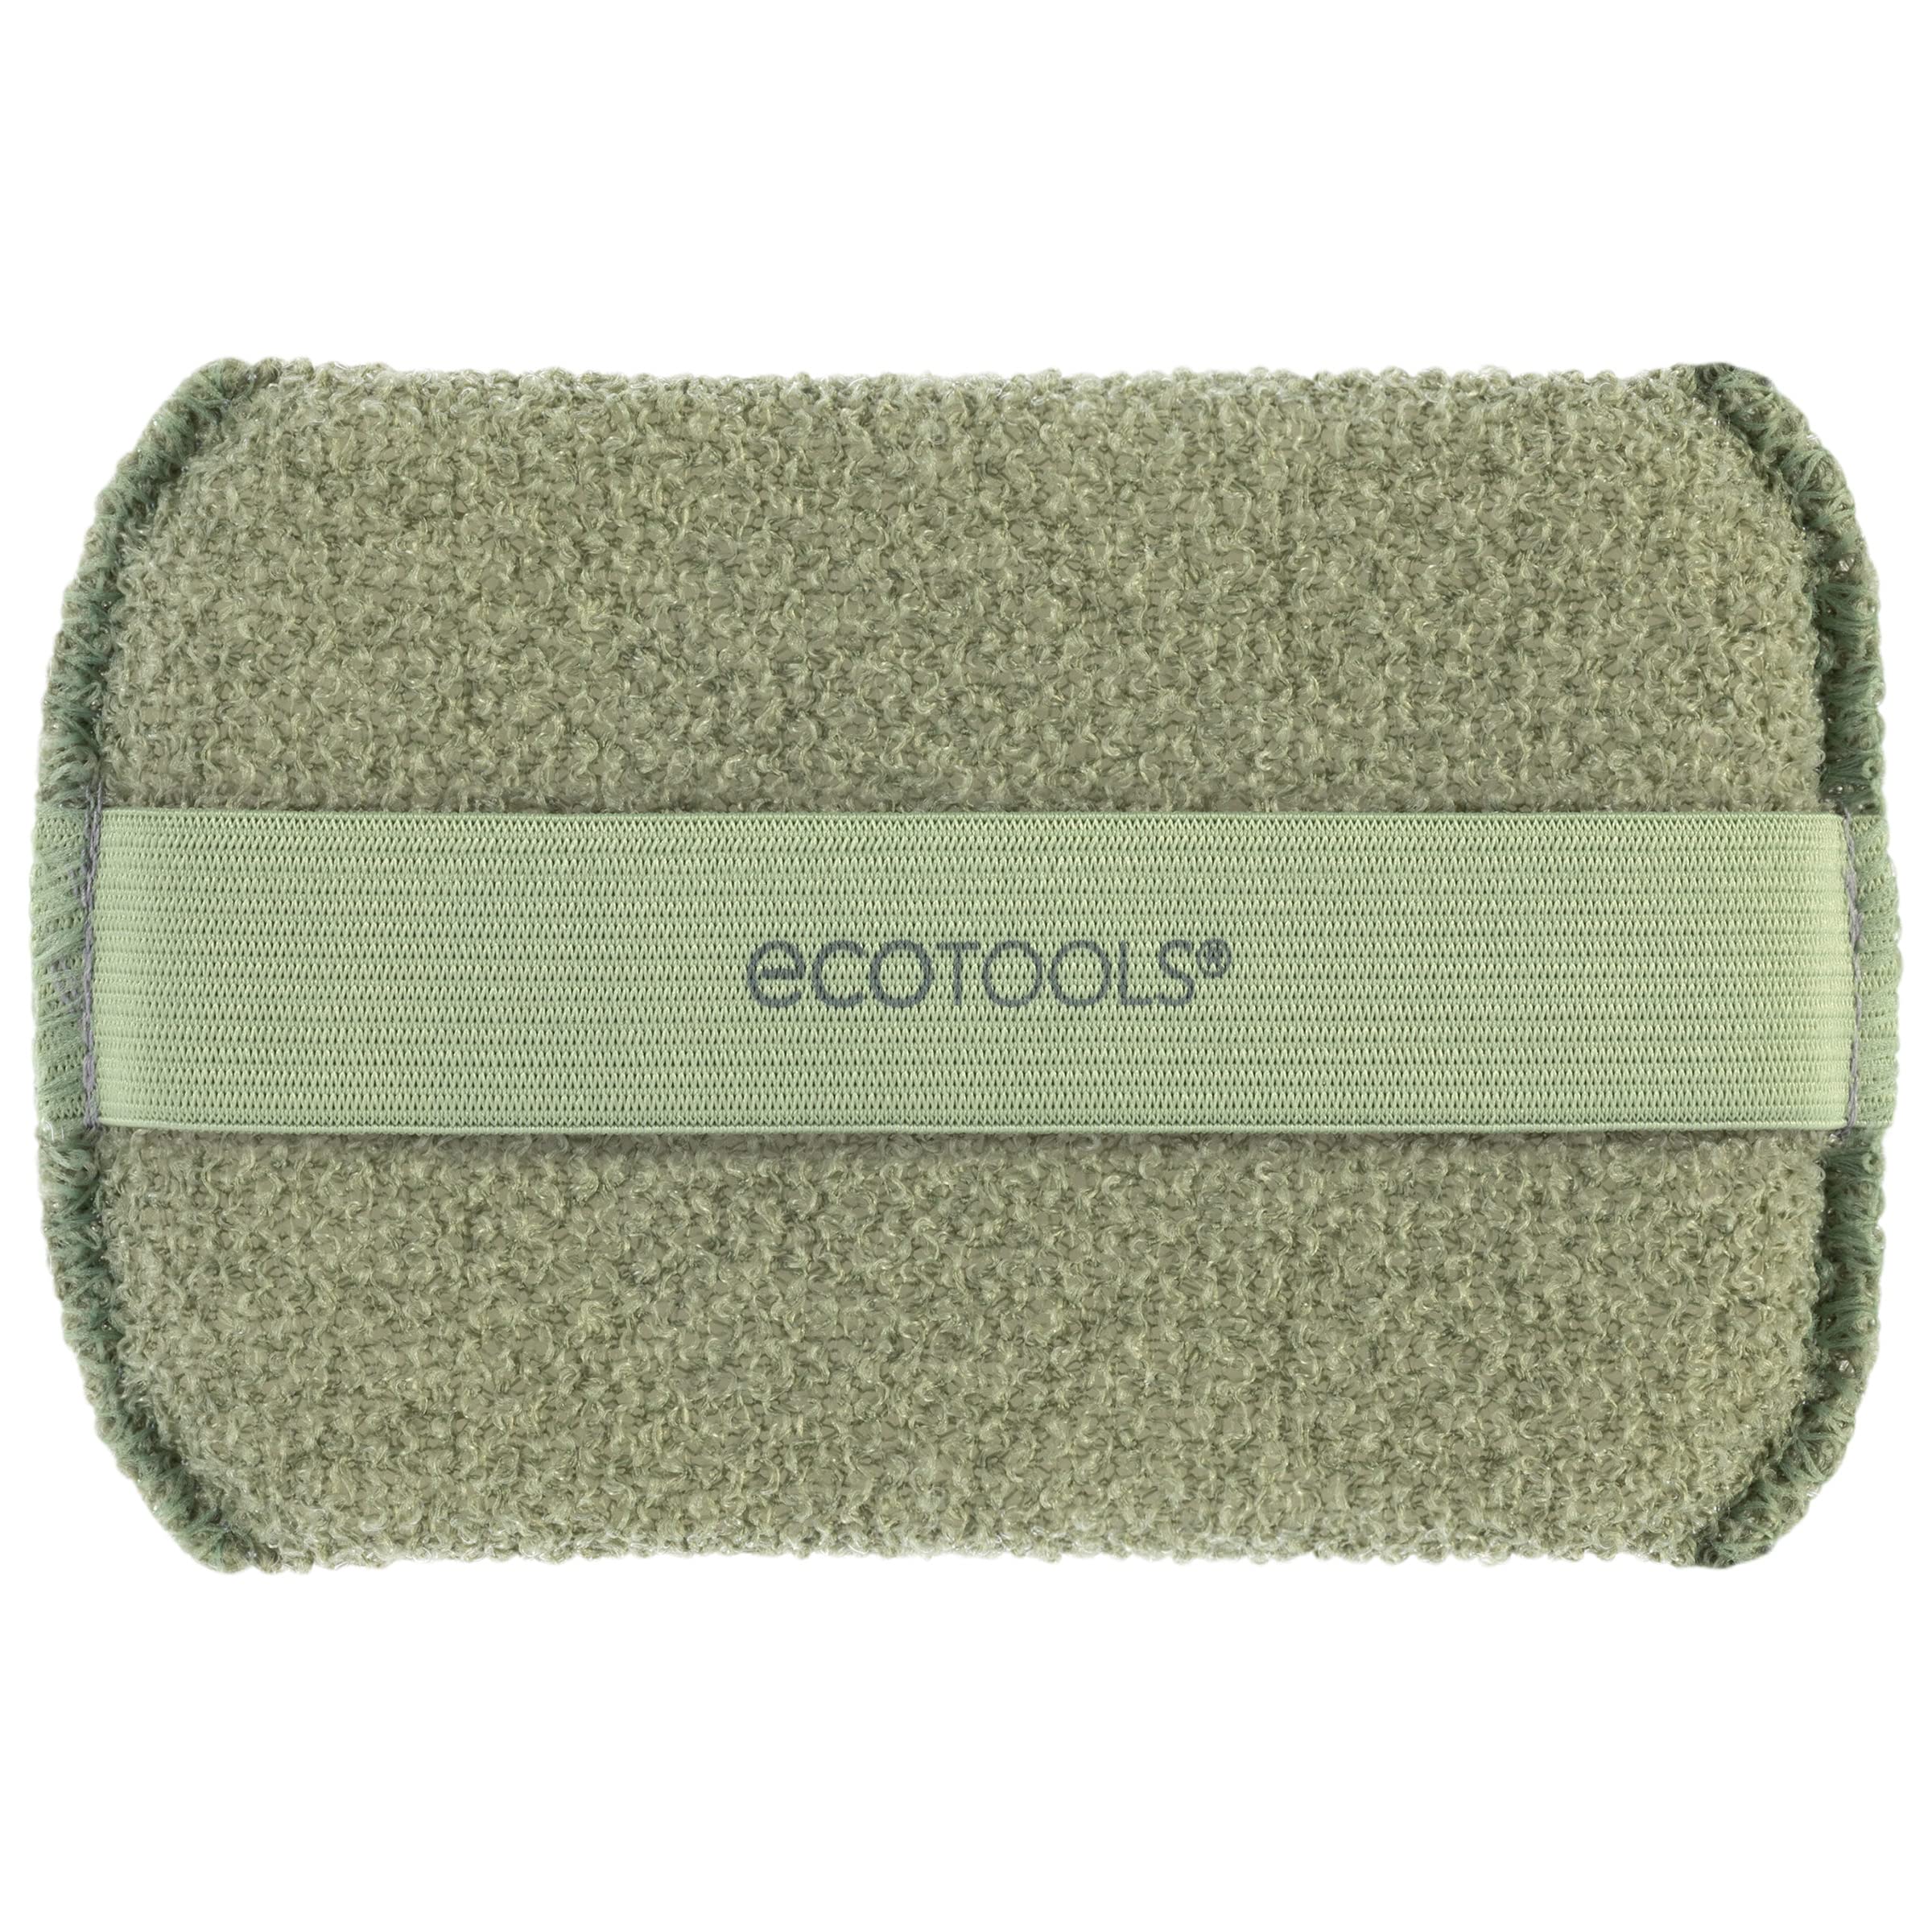 EcoTools Exfoliating Body Buffer, for Body Cleansing, Removes Dead Skin, Moderate Exfoliation, Bath & Shower Accessory, Designed with Strap, Sustainable & Vegan Body Scrubber, 4 Count